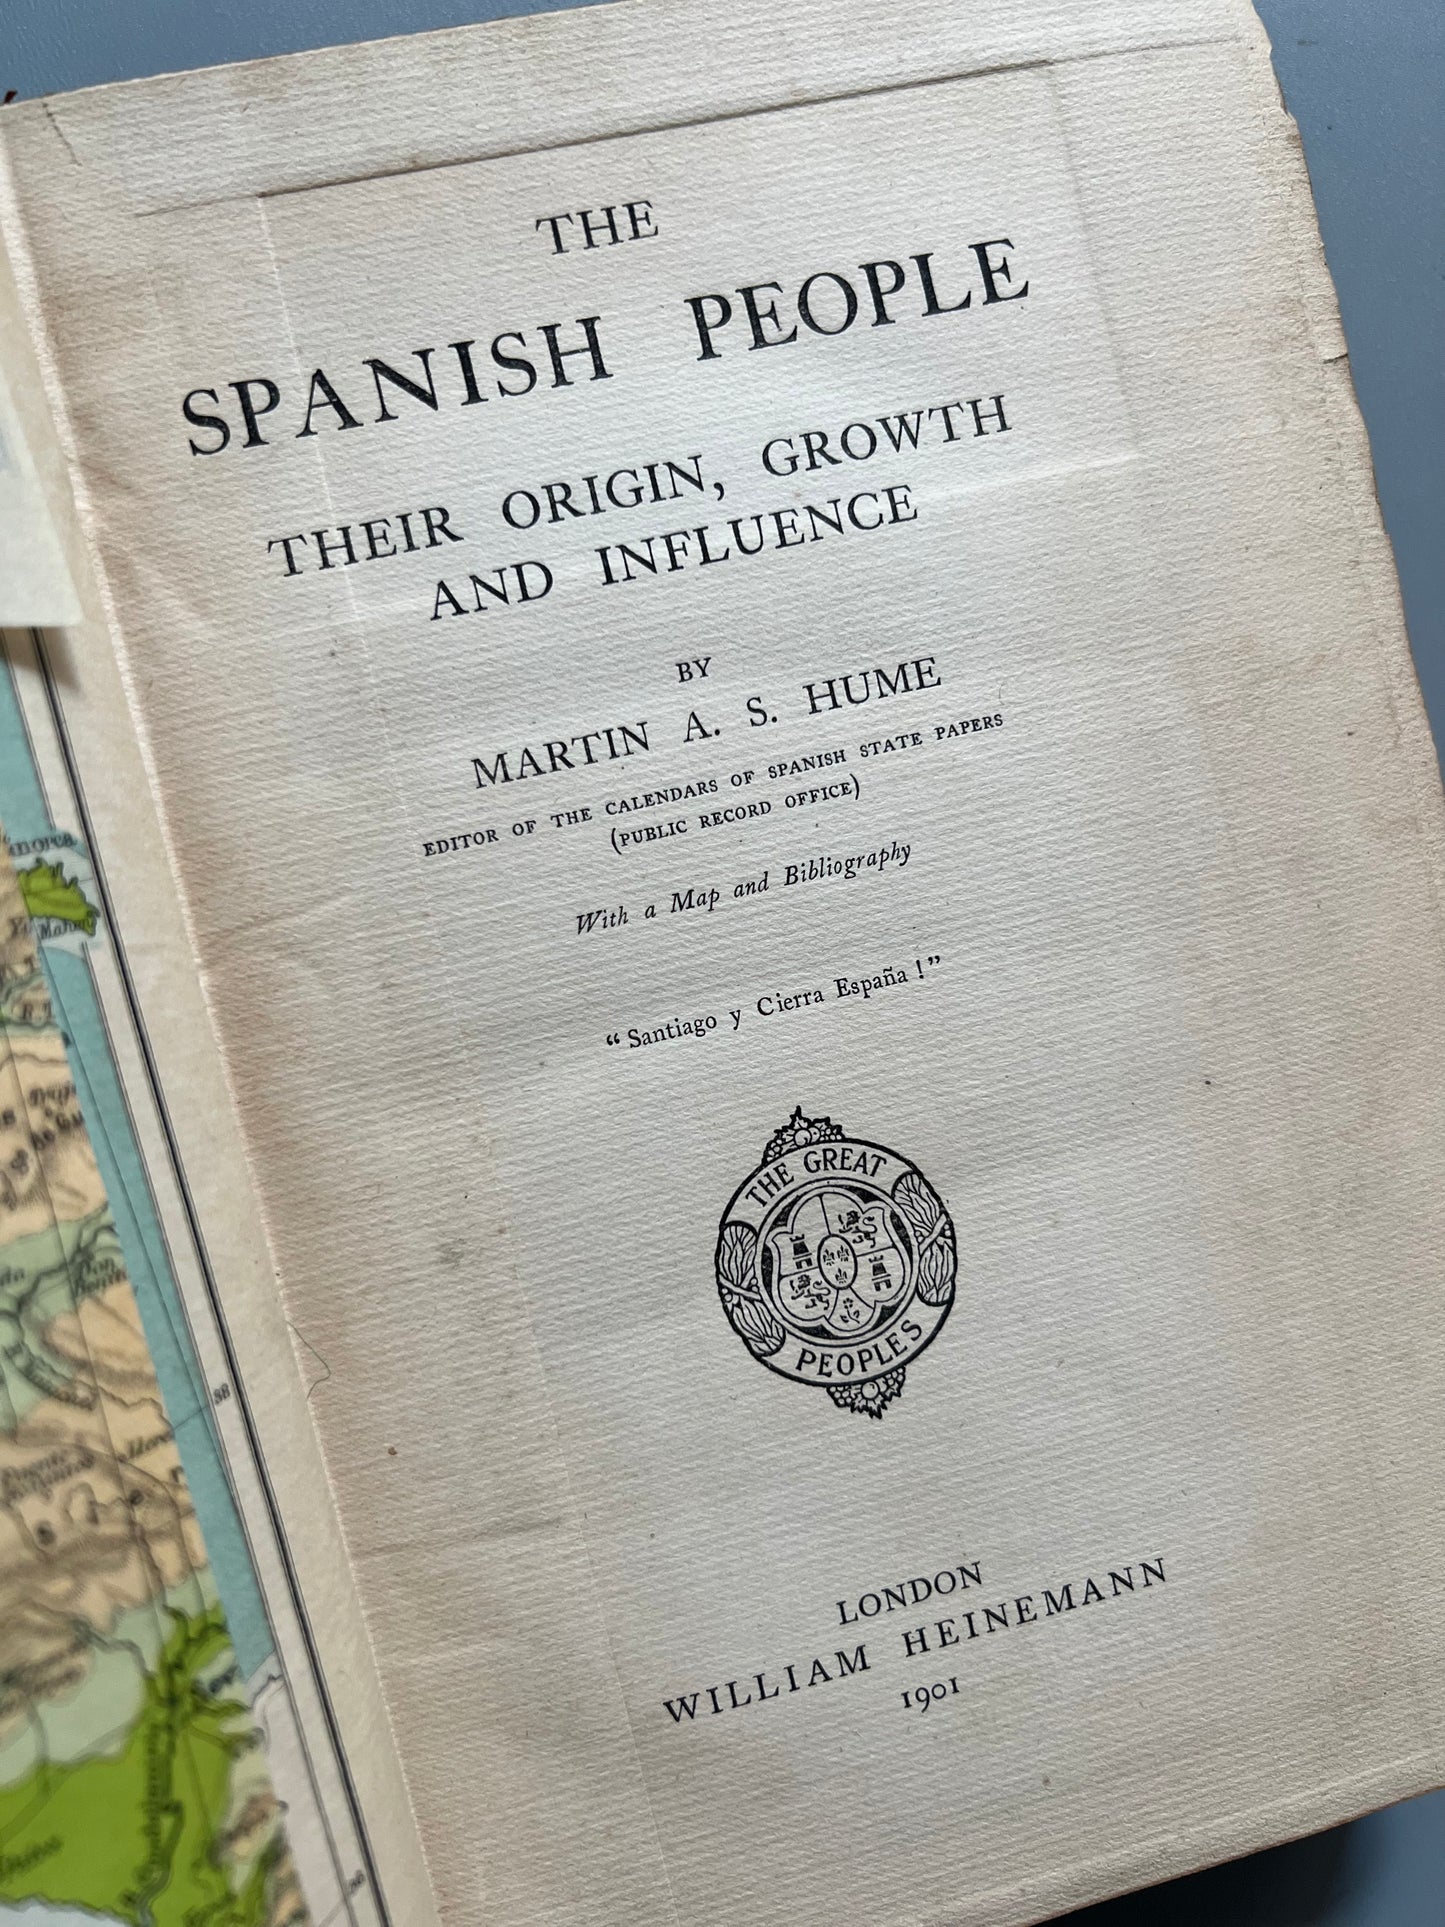 The spanish people, their origin, growth and influence, Martin A. S. Hume - William Heinemann, 1901